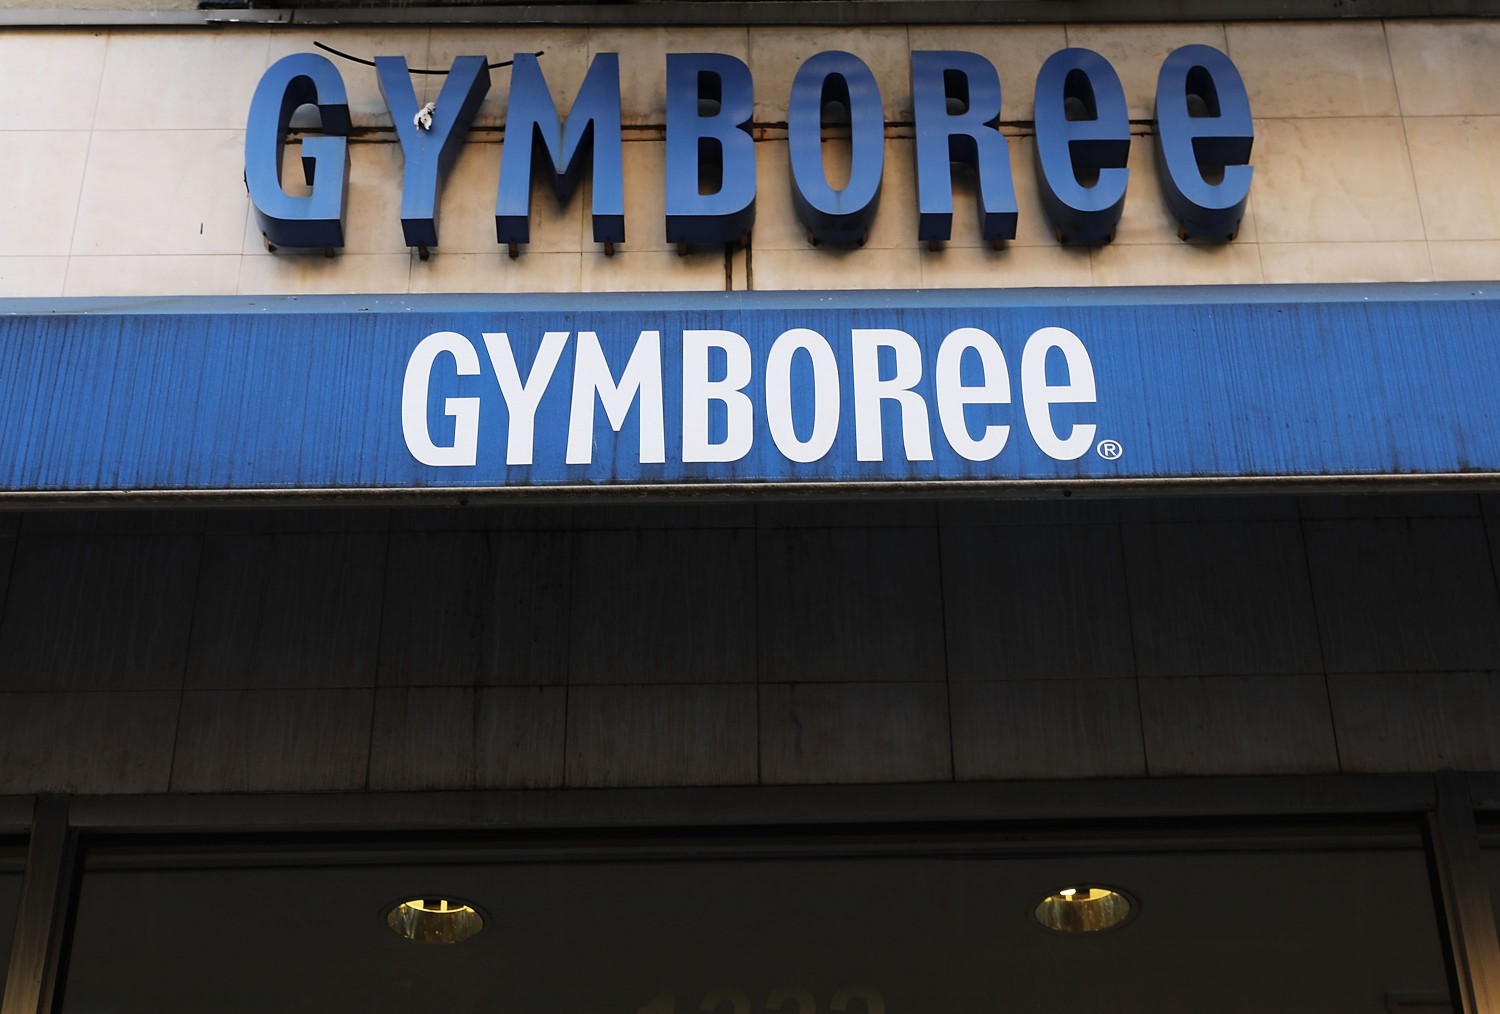 Kids Retailer Gymboree Files For Bankruptcy Protection